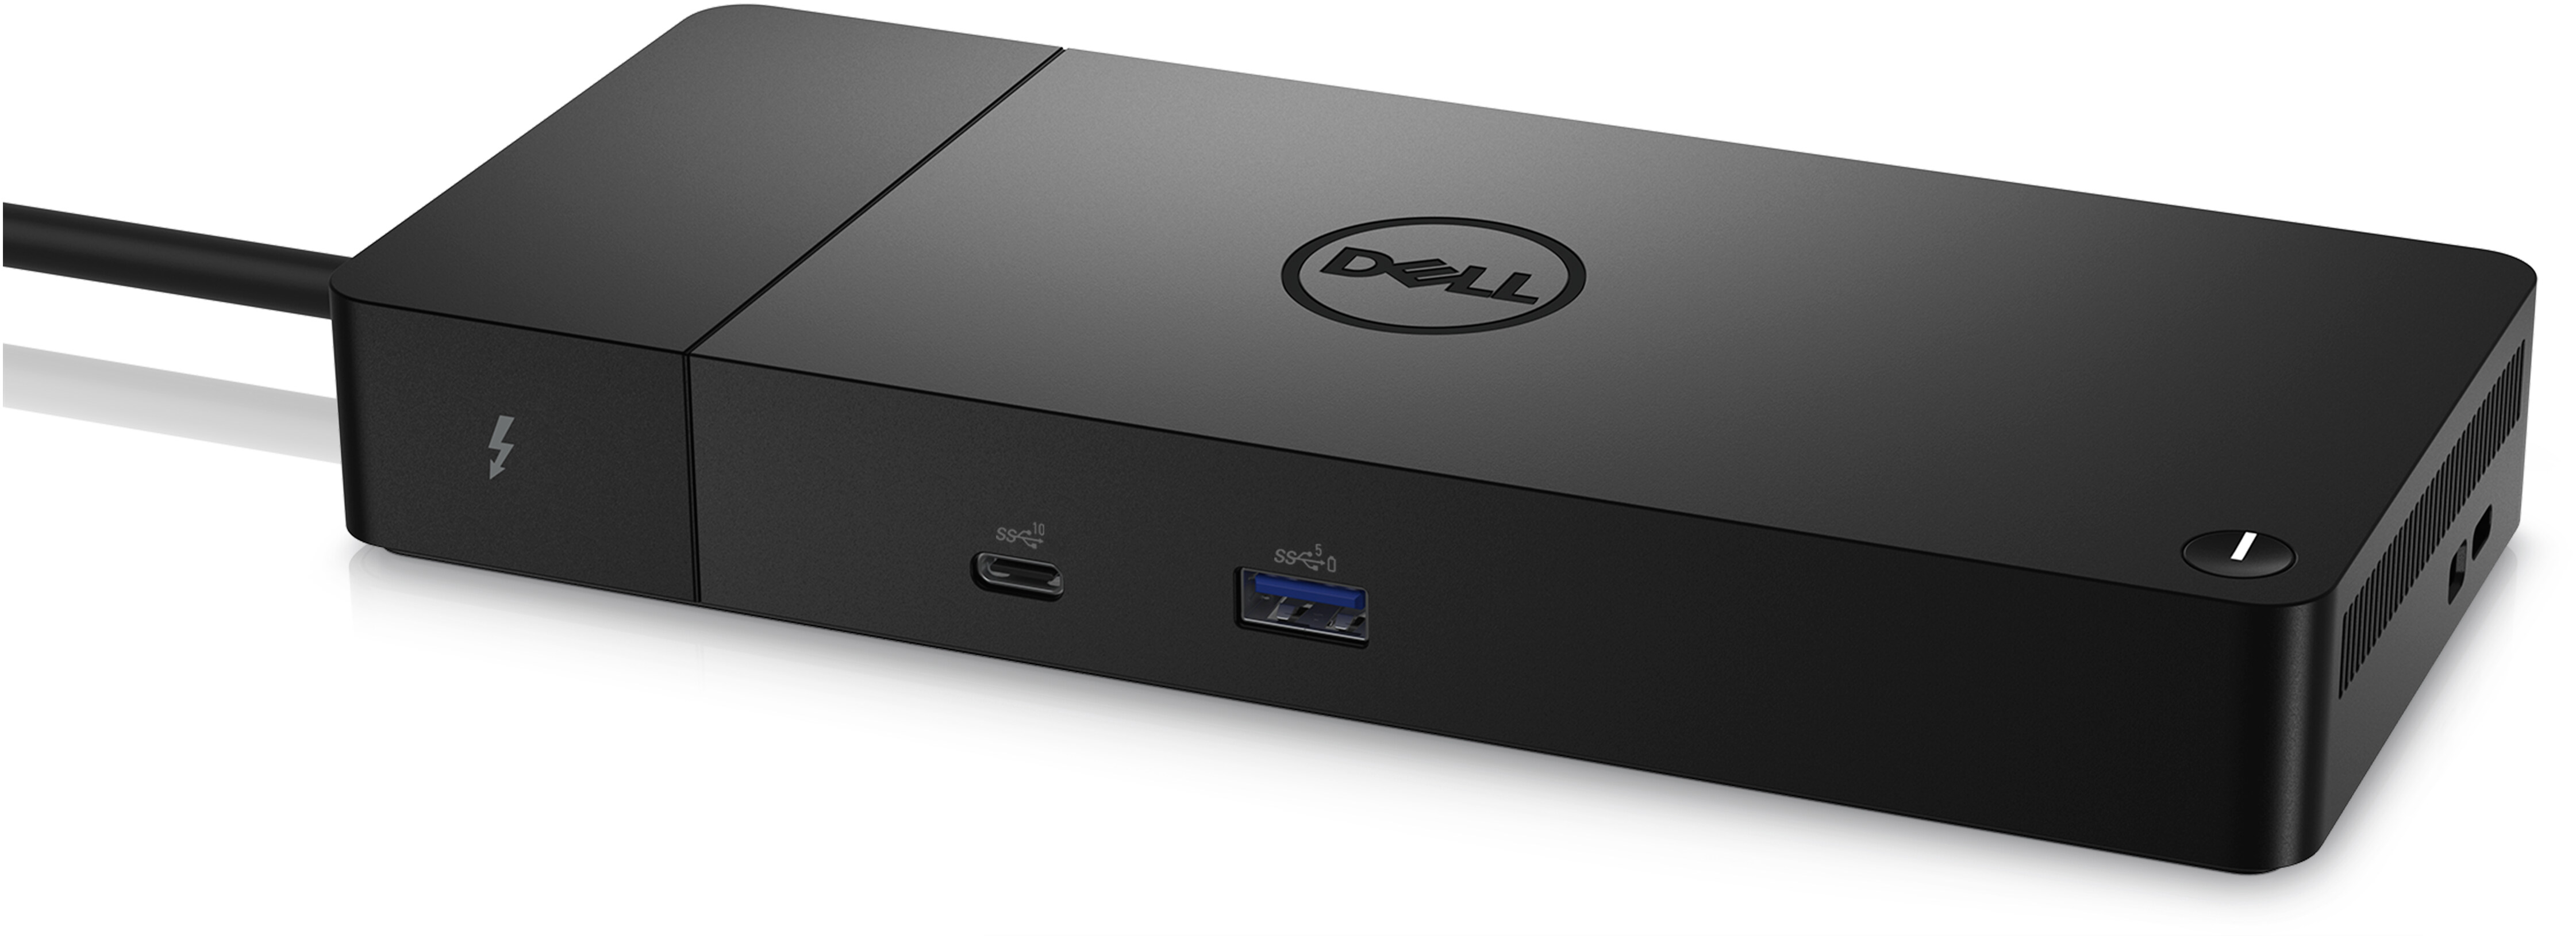 Dell Performance Portable SSD is 'world's most compact Thunderbolt